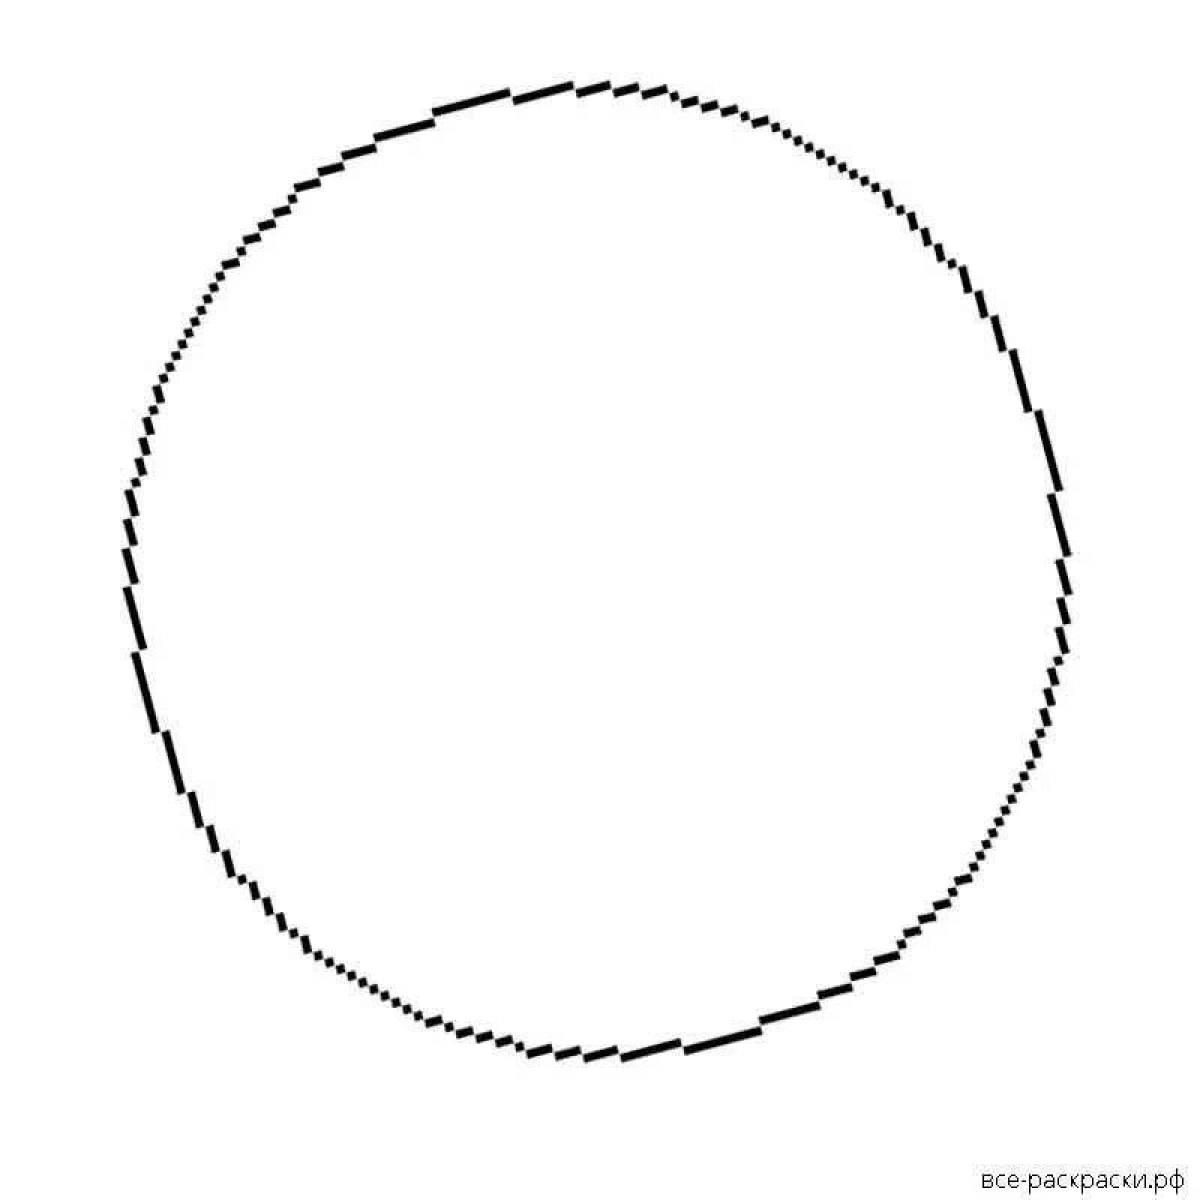 Coloring glowing circle with lines